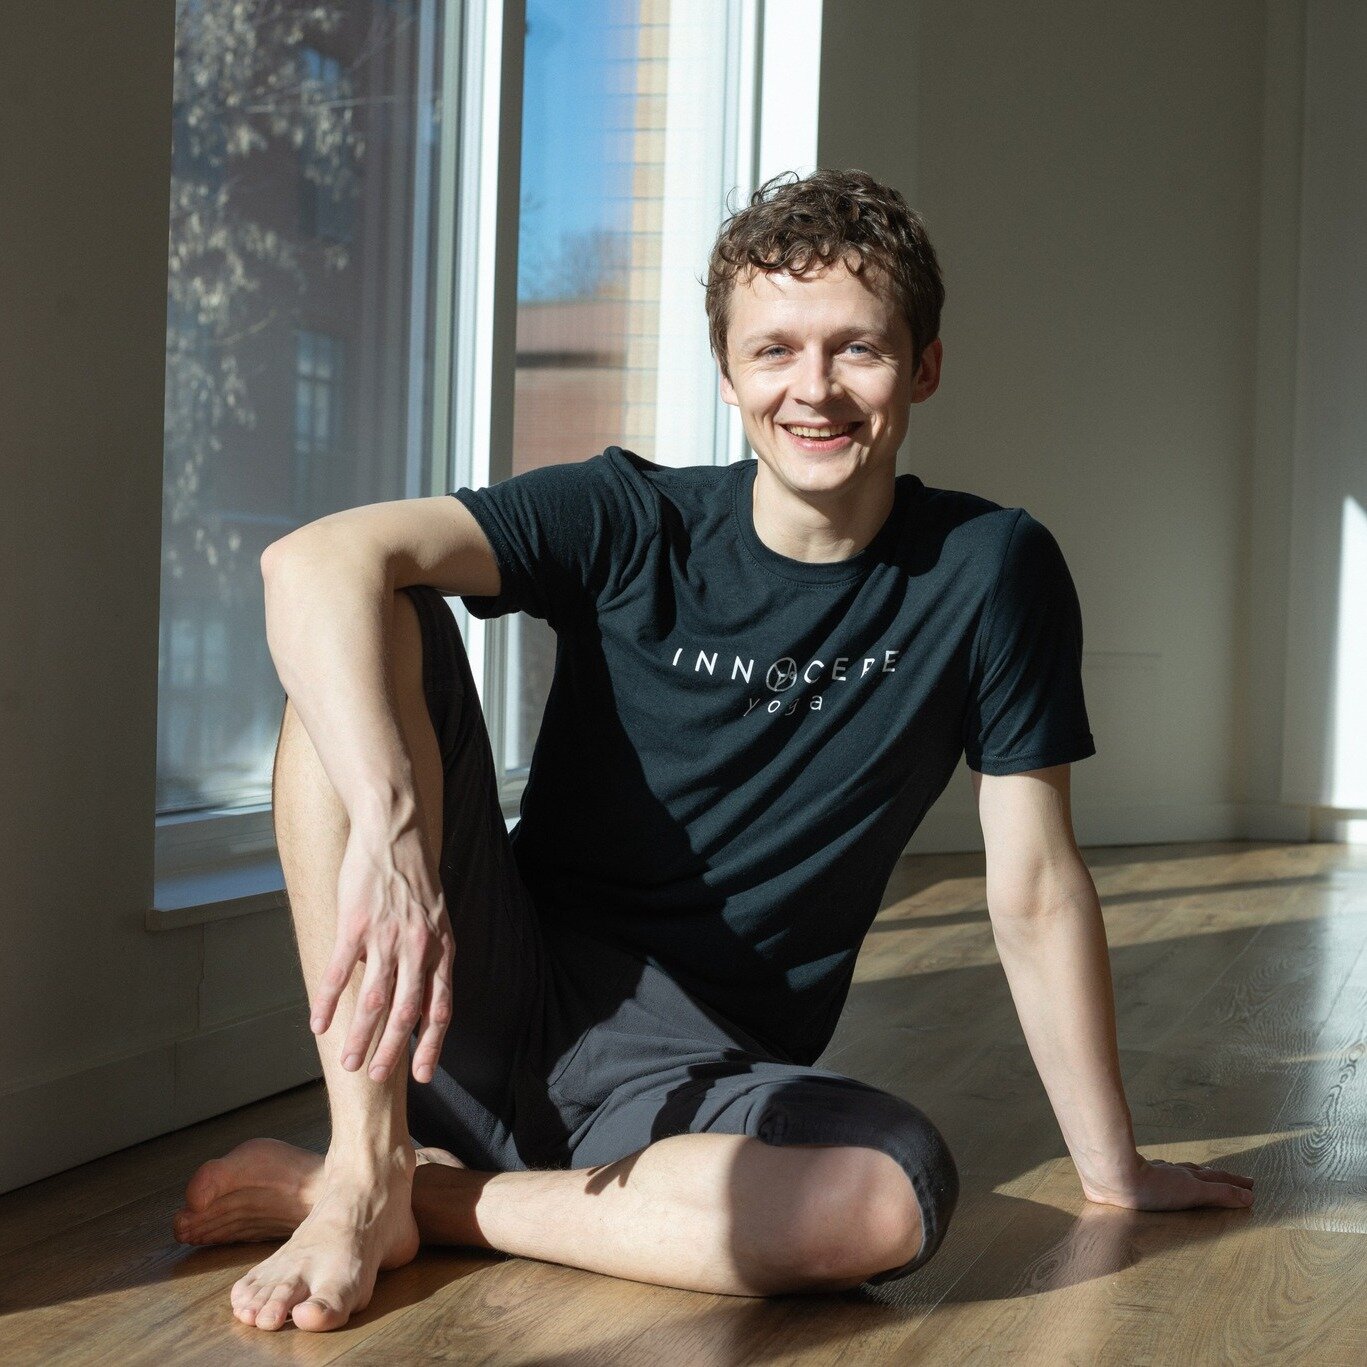 𝗛𝗮𝘃𝗲 𝘆𝗼𝘂 𝗺𝗲𝘁 𝗦𝗮𝗺 𝘆𝗲𝘁? He teaches both Ashtanga and Vinyasa classes here at Innocere. Sam has been practicing and teaching since 2010 and has had the good fortune to teach Yoga around the world&mdash;including the birthplace of the pra